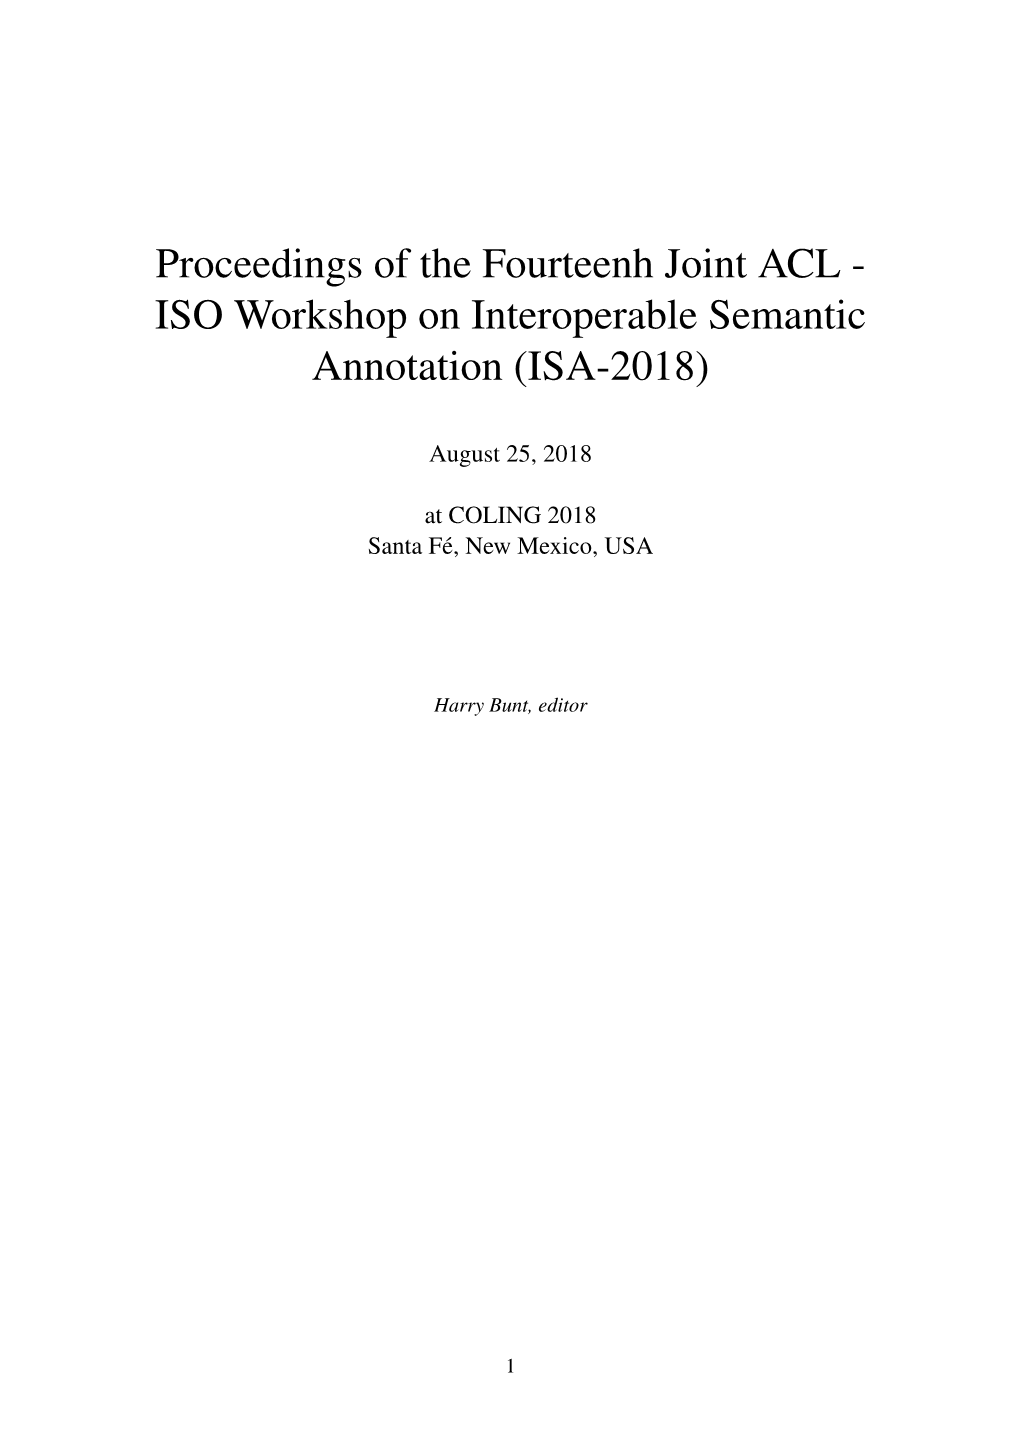 Proceedings of the Fourteenh Joint ACL - ISO Workshop on Interoperable Semantic Annotation (ISA-2018)